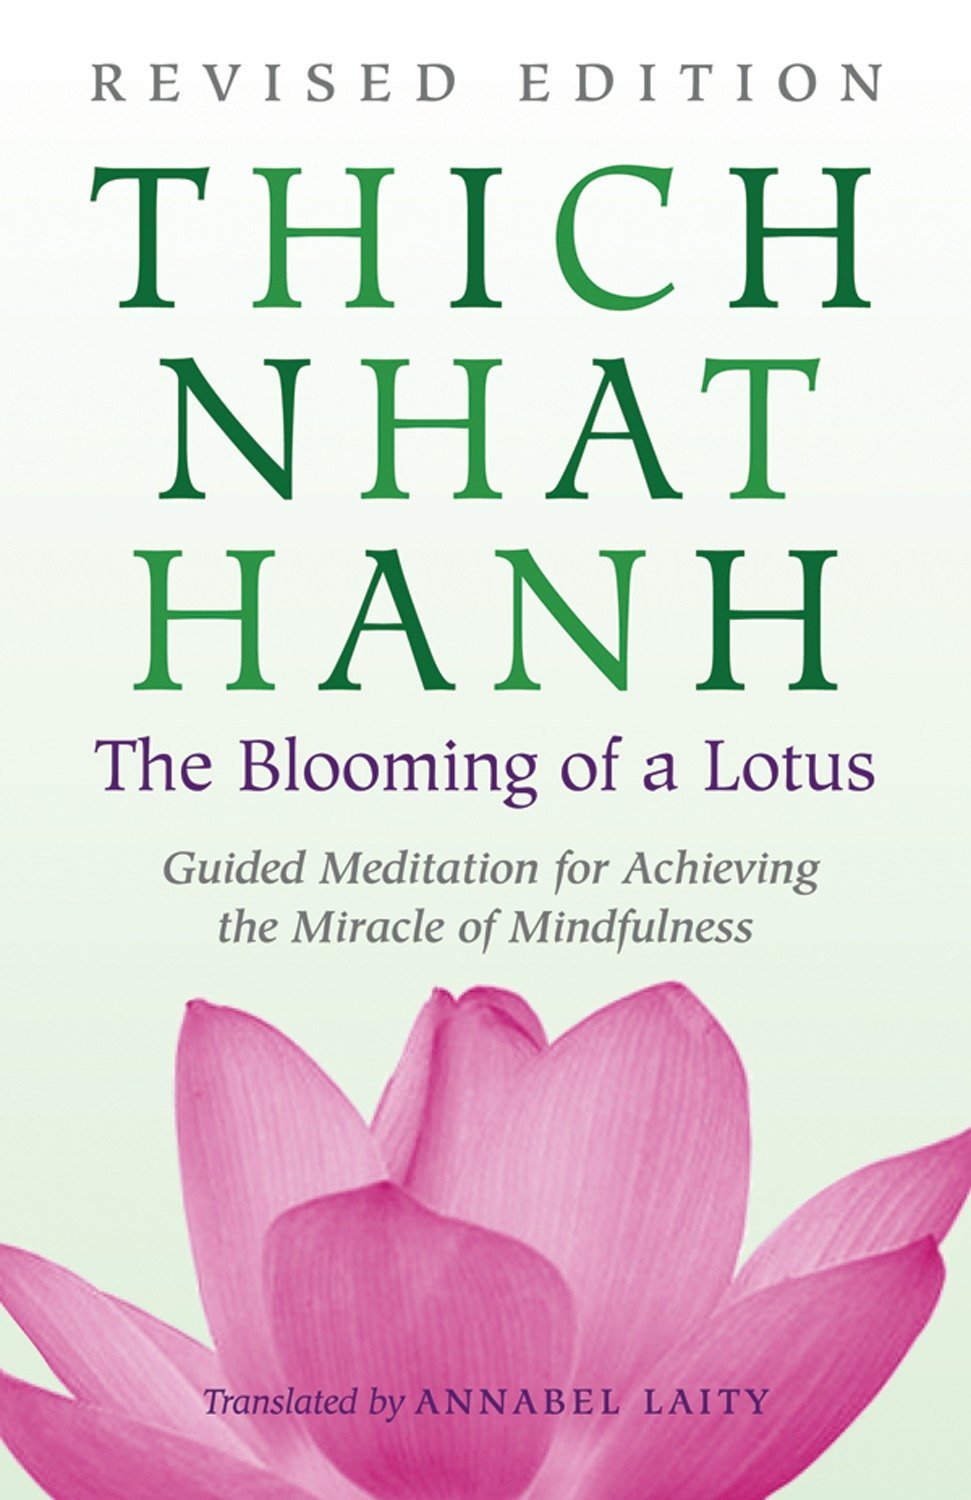 If You Want To Be A Winner, Change Your lotus village Philosophy Now!